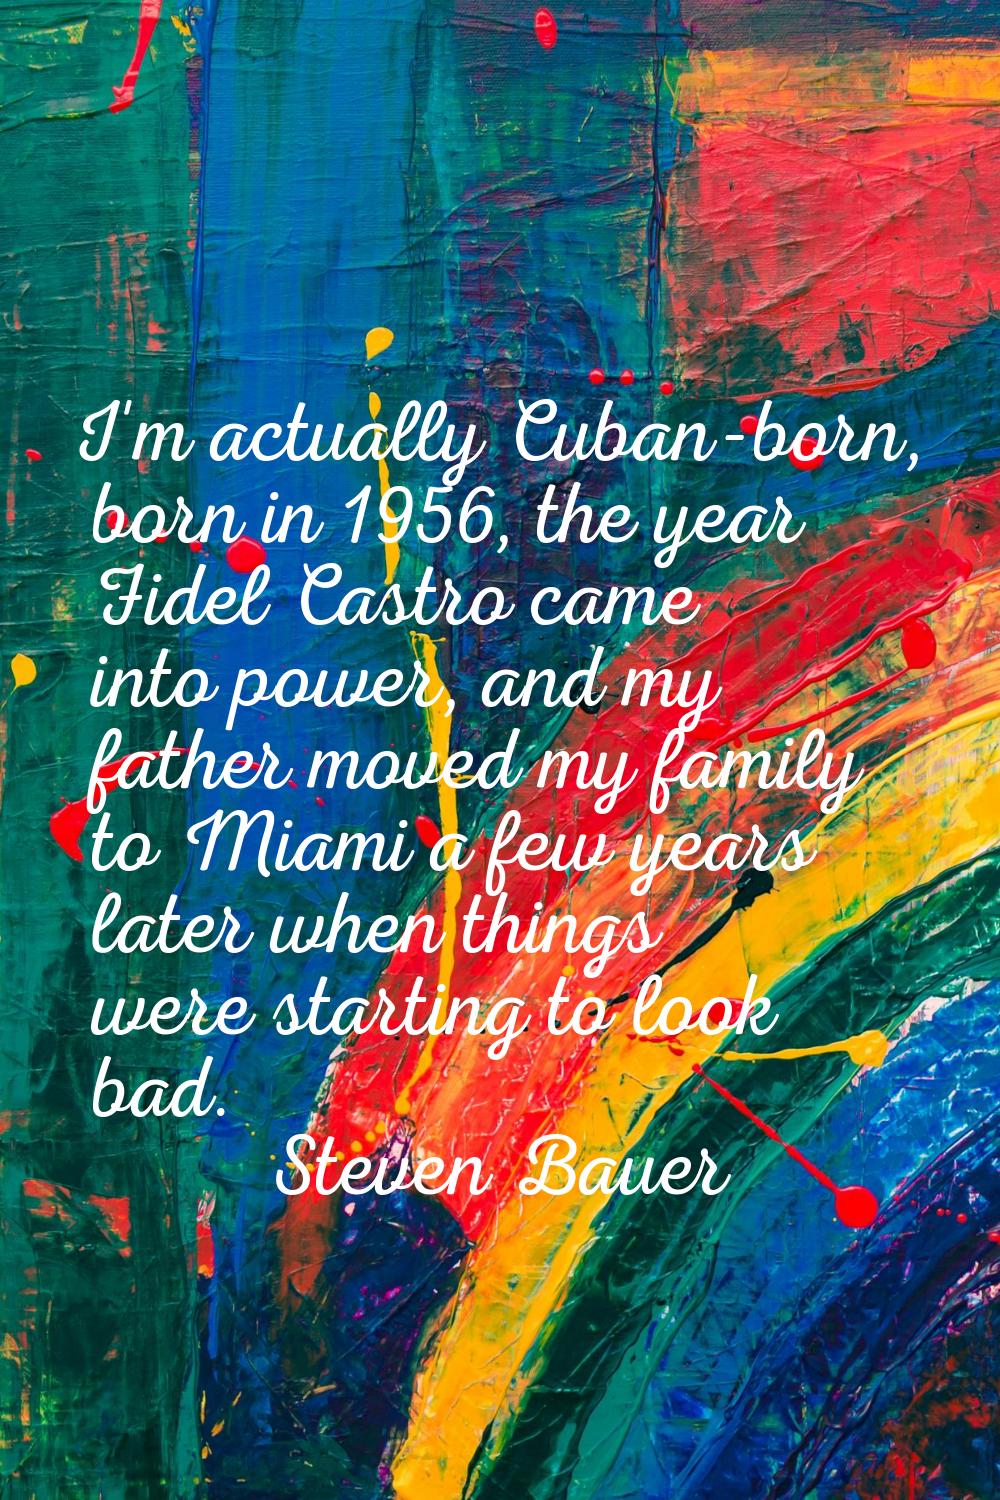 I'm actually Cuban-born, born in 1956, the year Fidel Castro came into power, and my father moved m